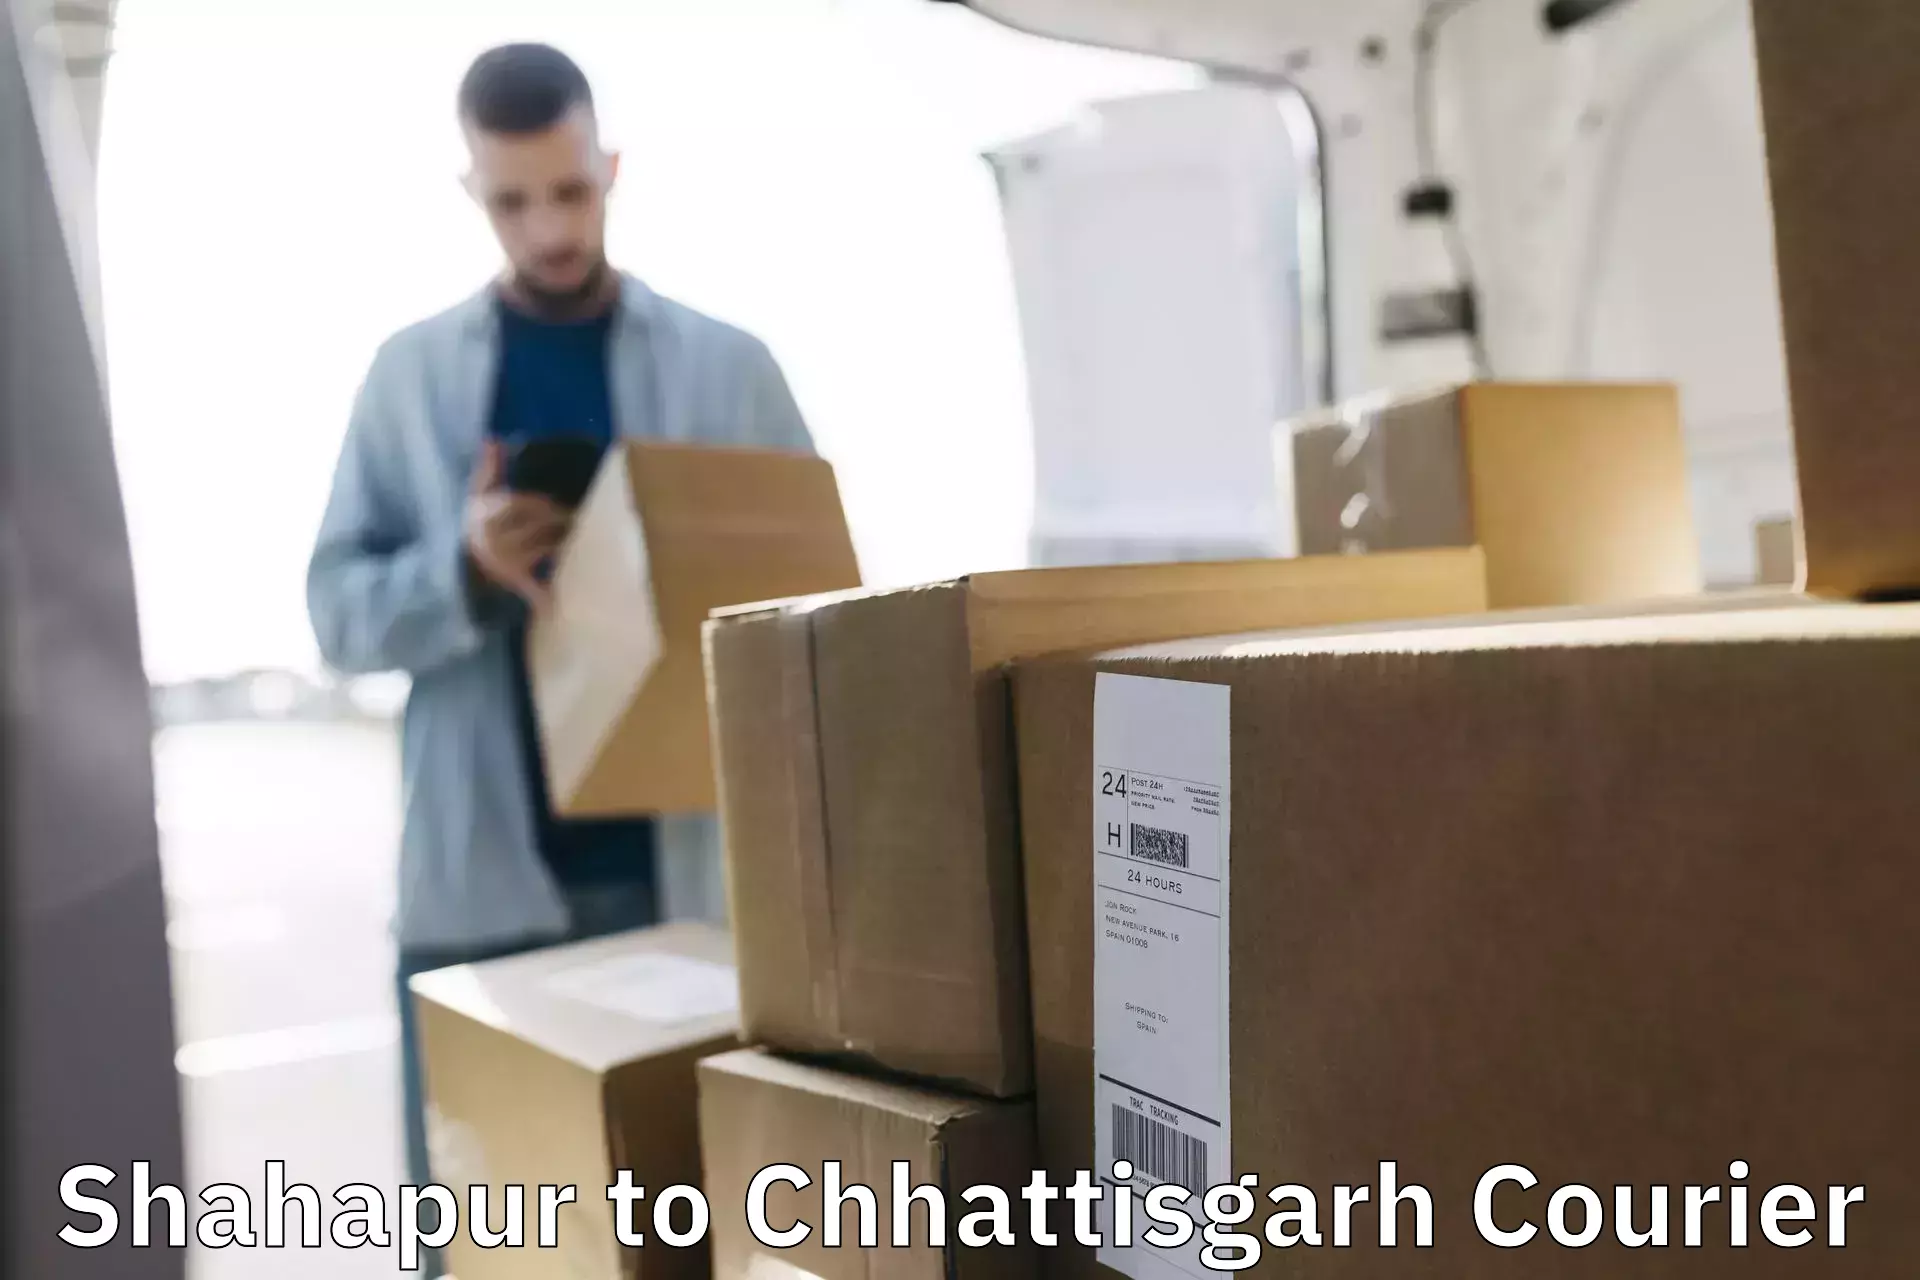 Reliable parcel services in Shahapur to Pratappur